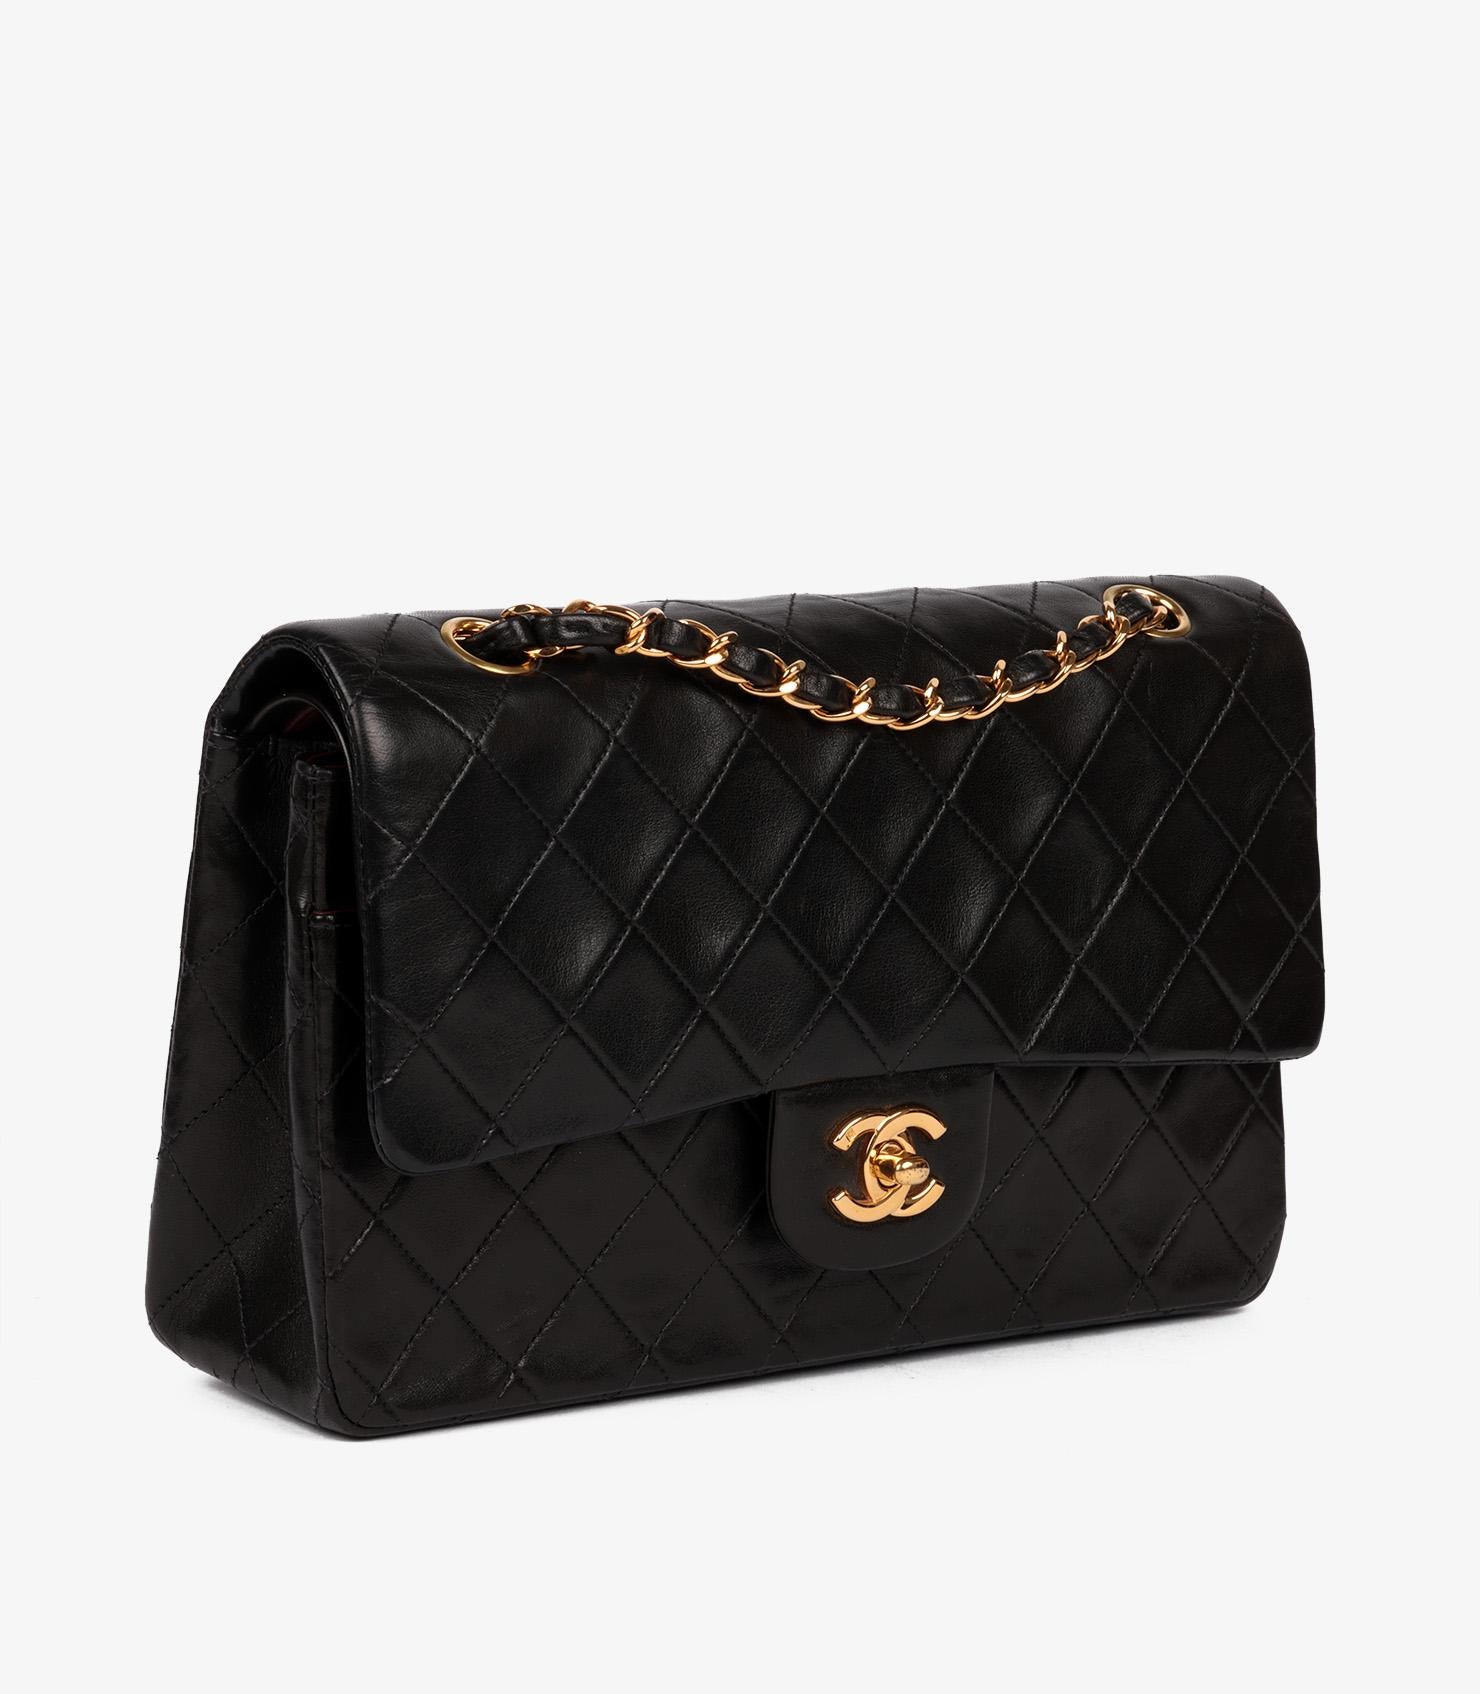 Chanel Black Quilted Lambskin Vintage Medium Classic Double Flap Bag In Excellent Condition For Sale In Bishop's Stortford, Hertfordshire